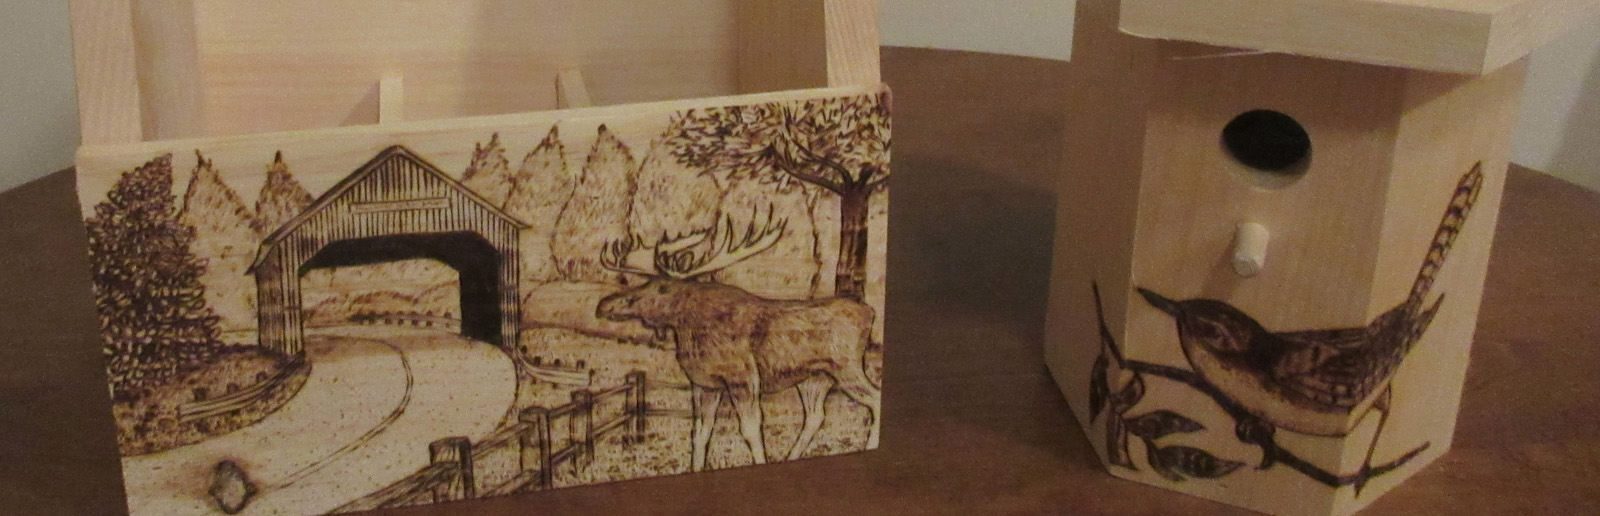 Moose Pyrography Bottle Carrier